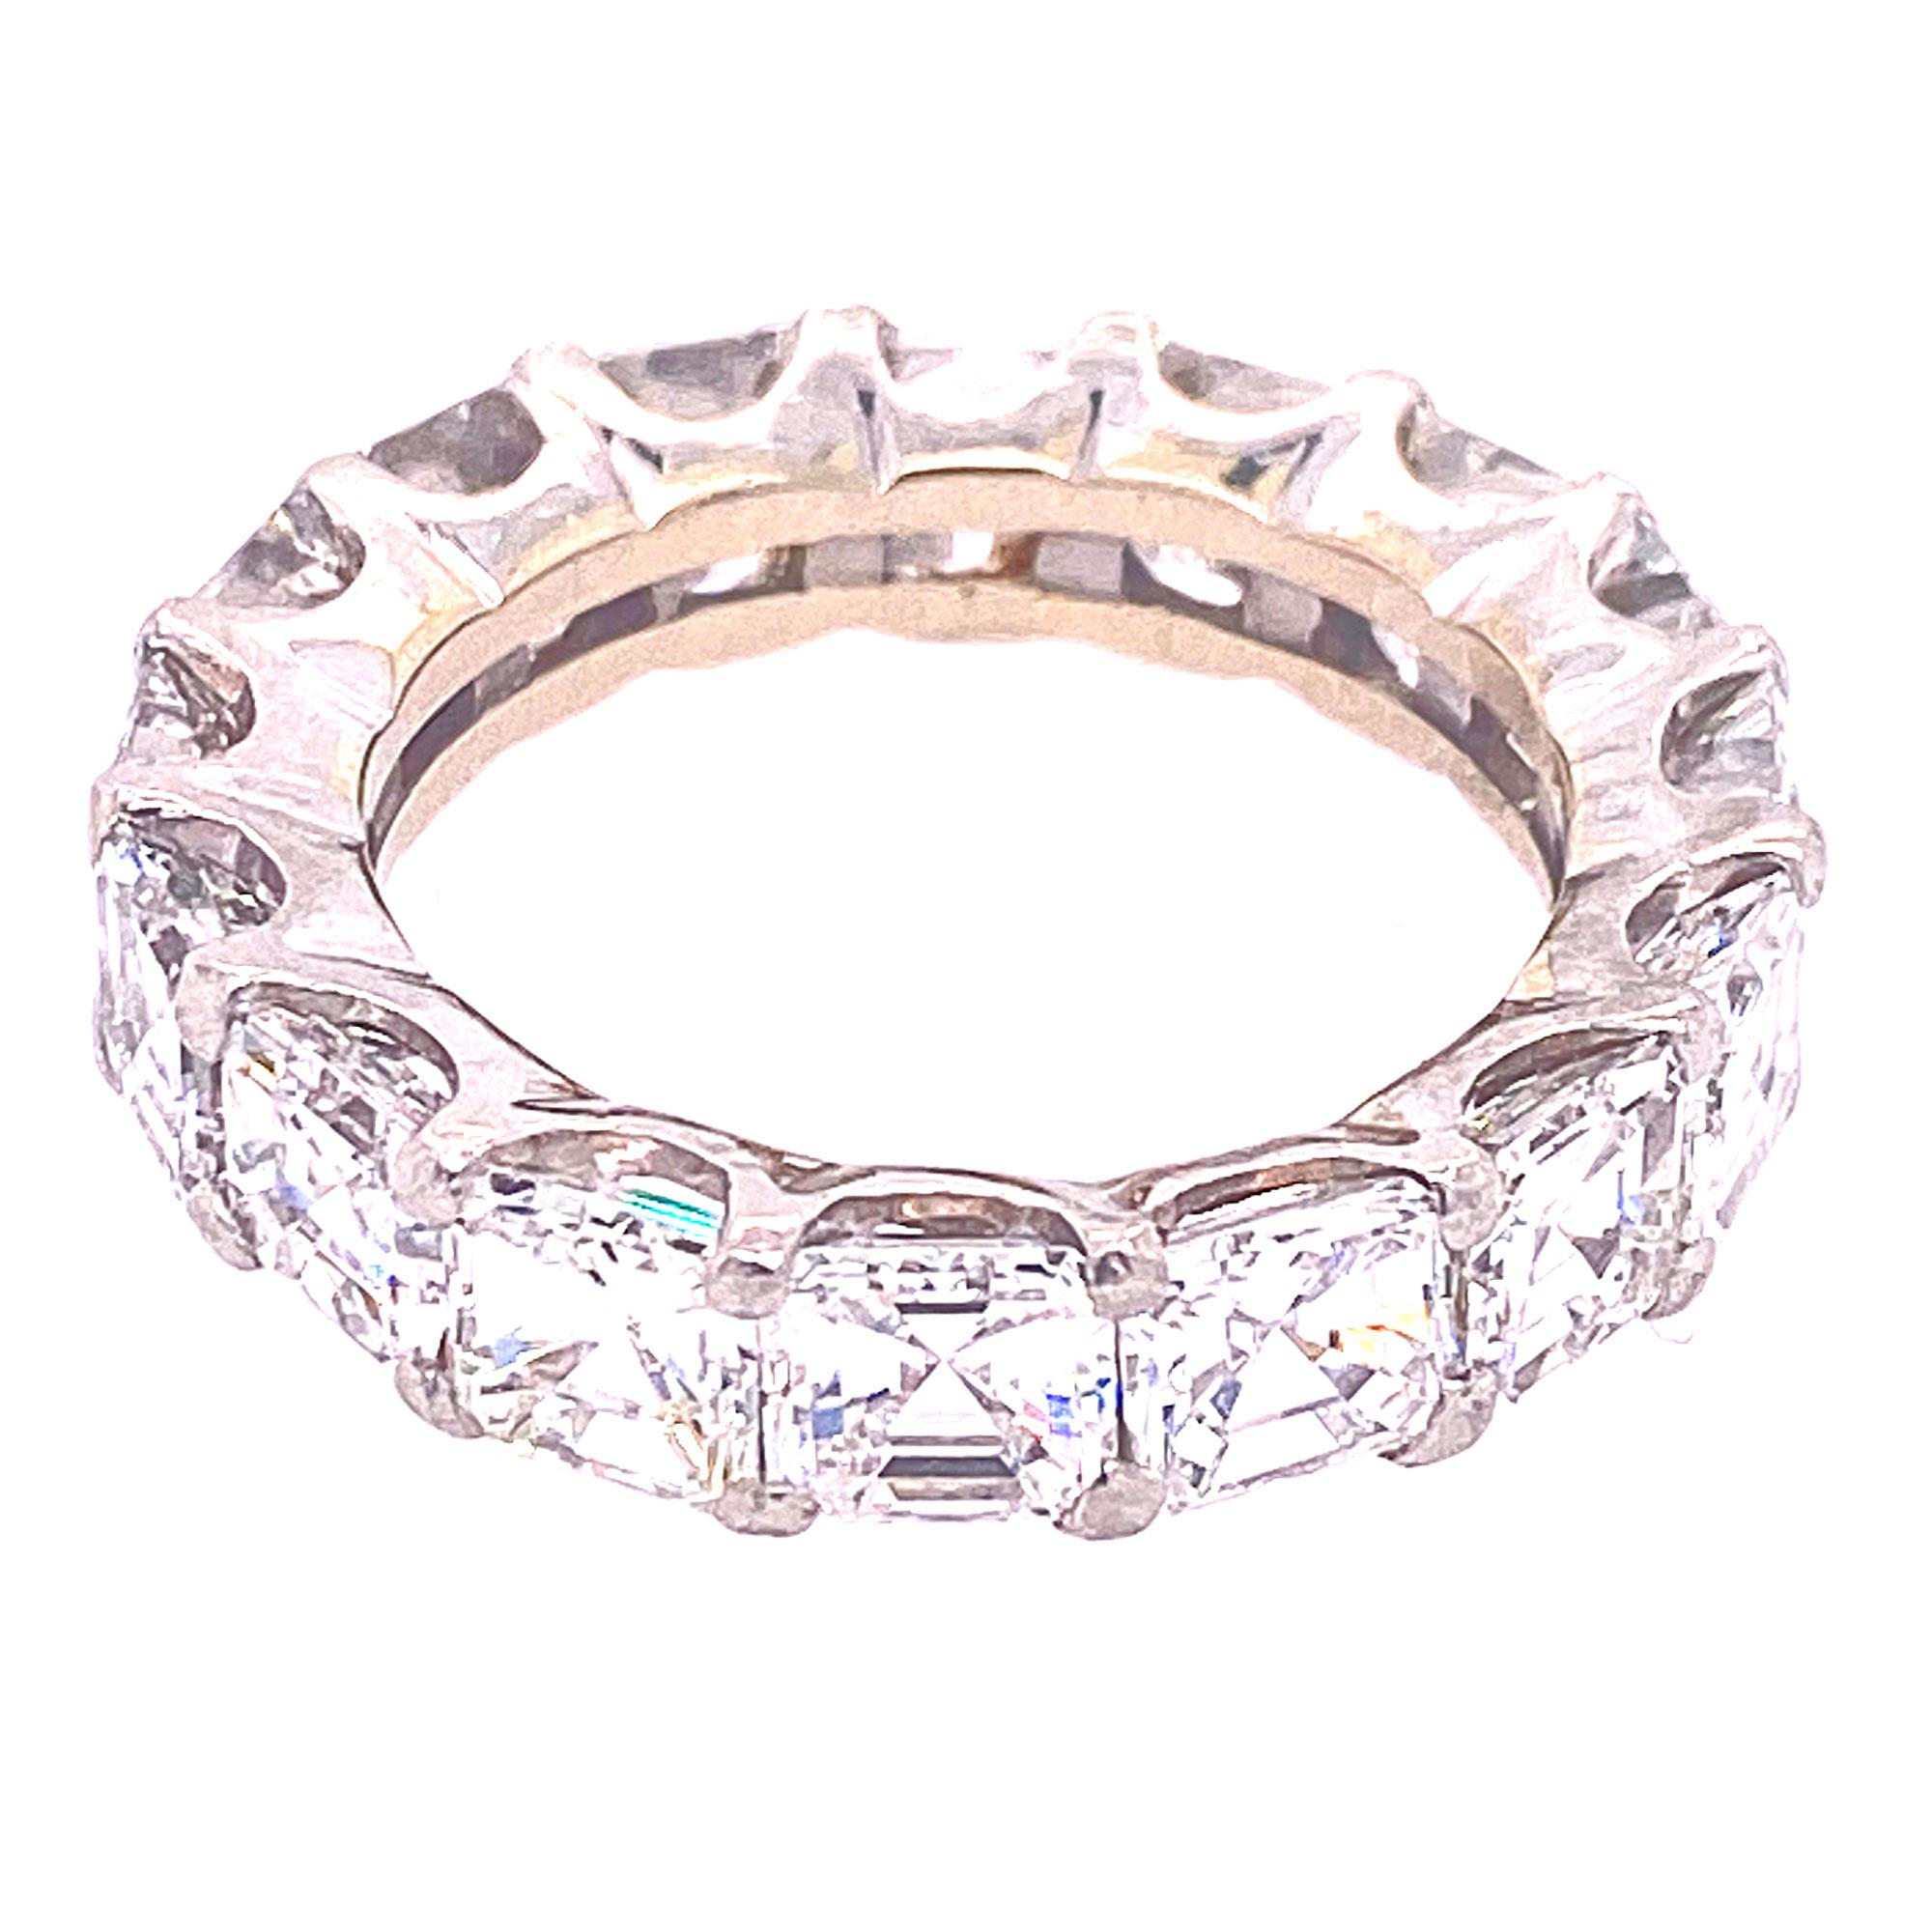 Stunning diamond eternity band featuring 16 asscher cut matched diamonds that weigh 7.00 carat total weight. The diamonds are all graded F-G color and VS clarity. The band will fit finger size 5.5-6. 